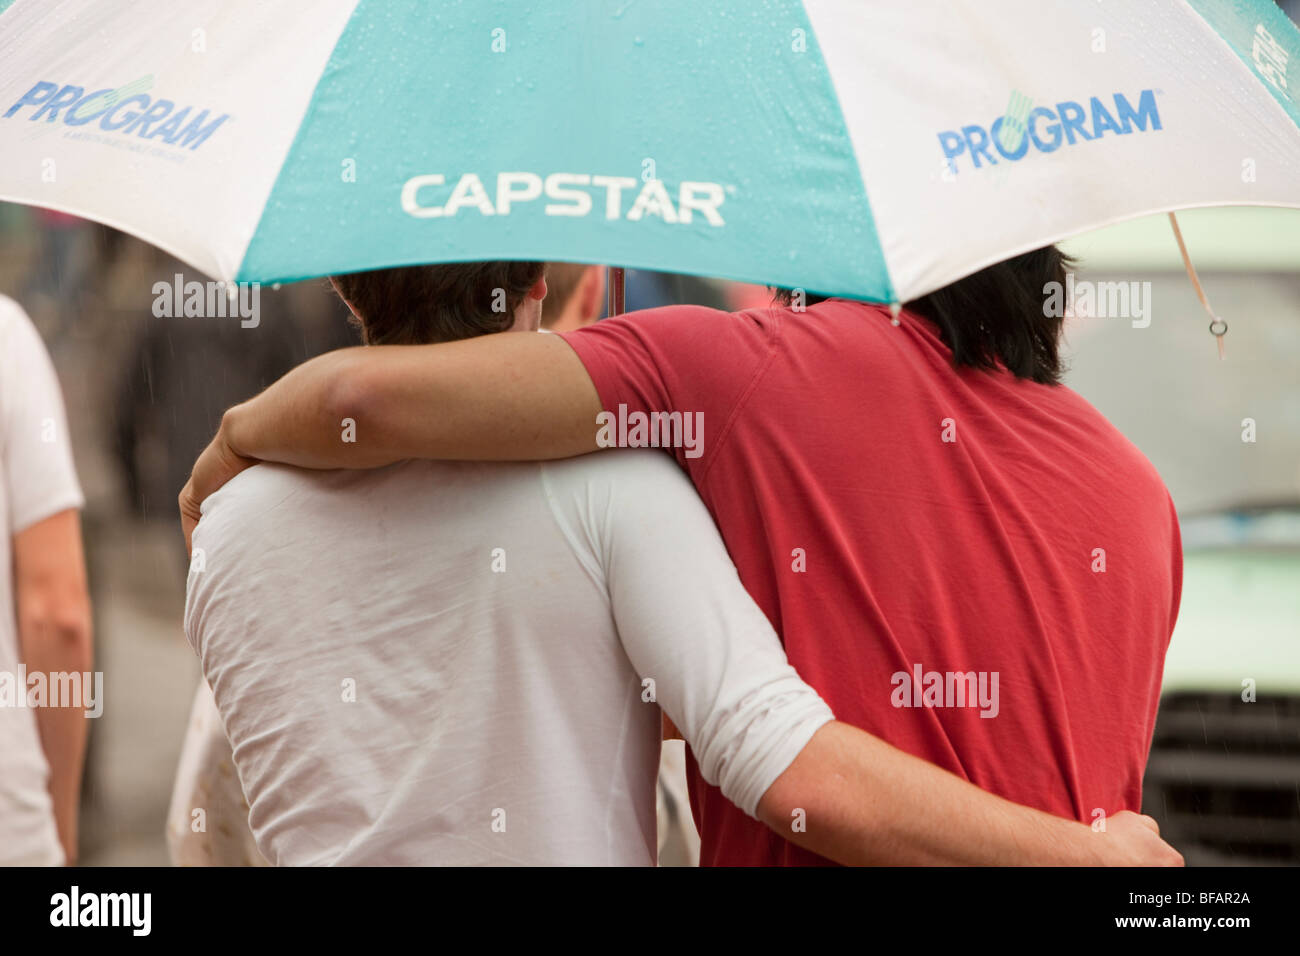 Two men sheltering under an umbrella in the rain. Stock Photo